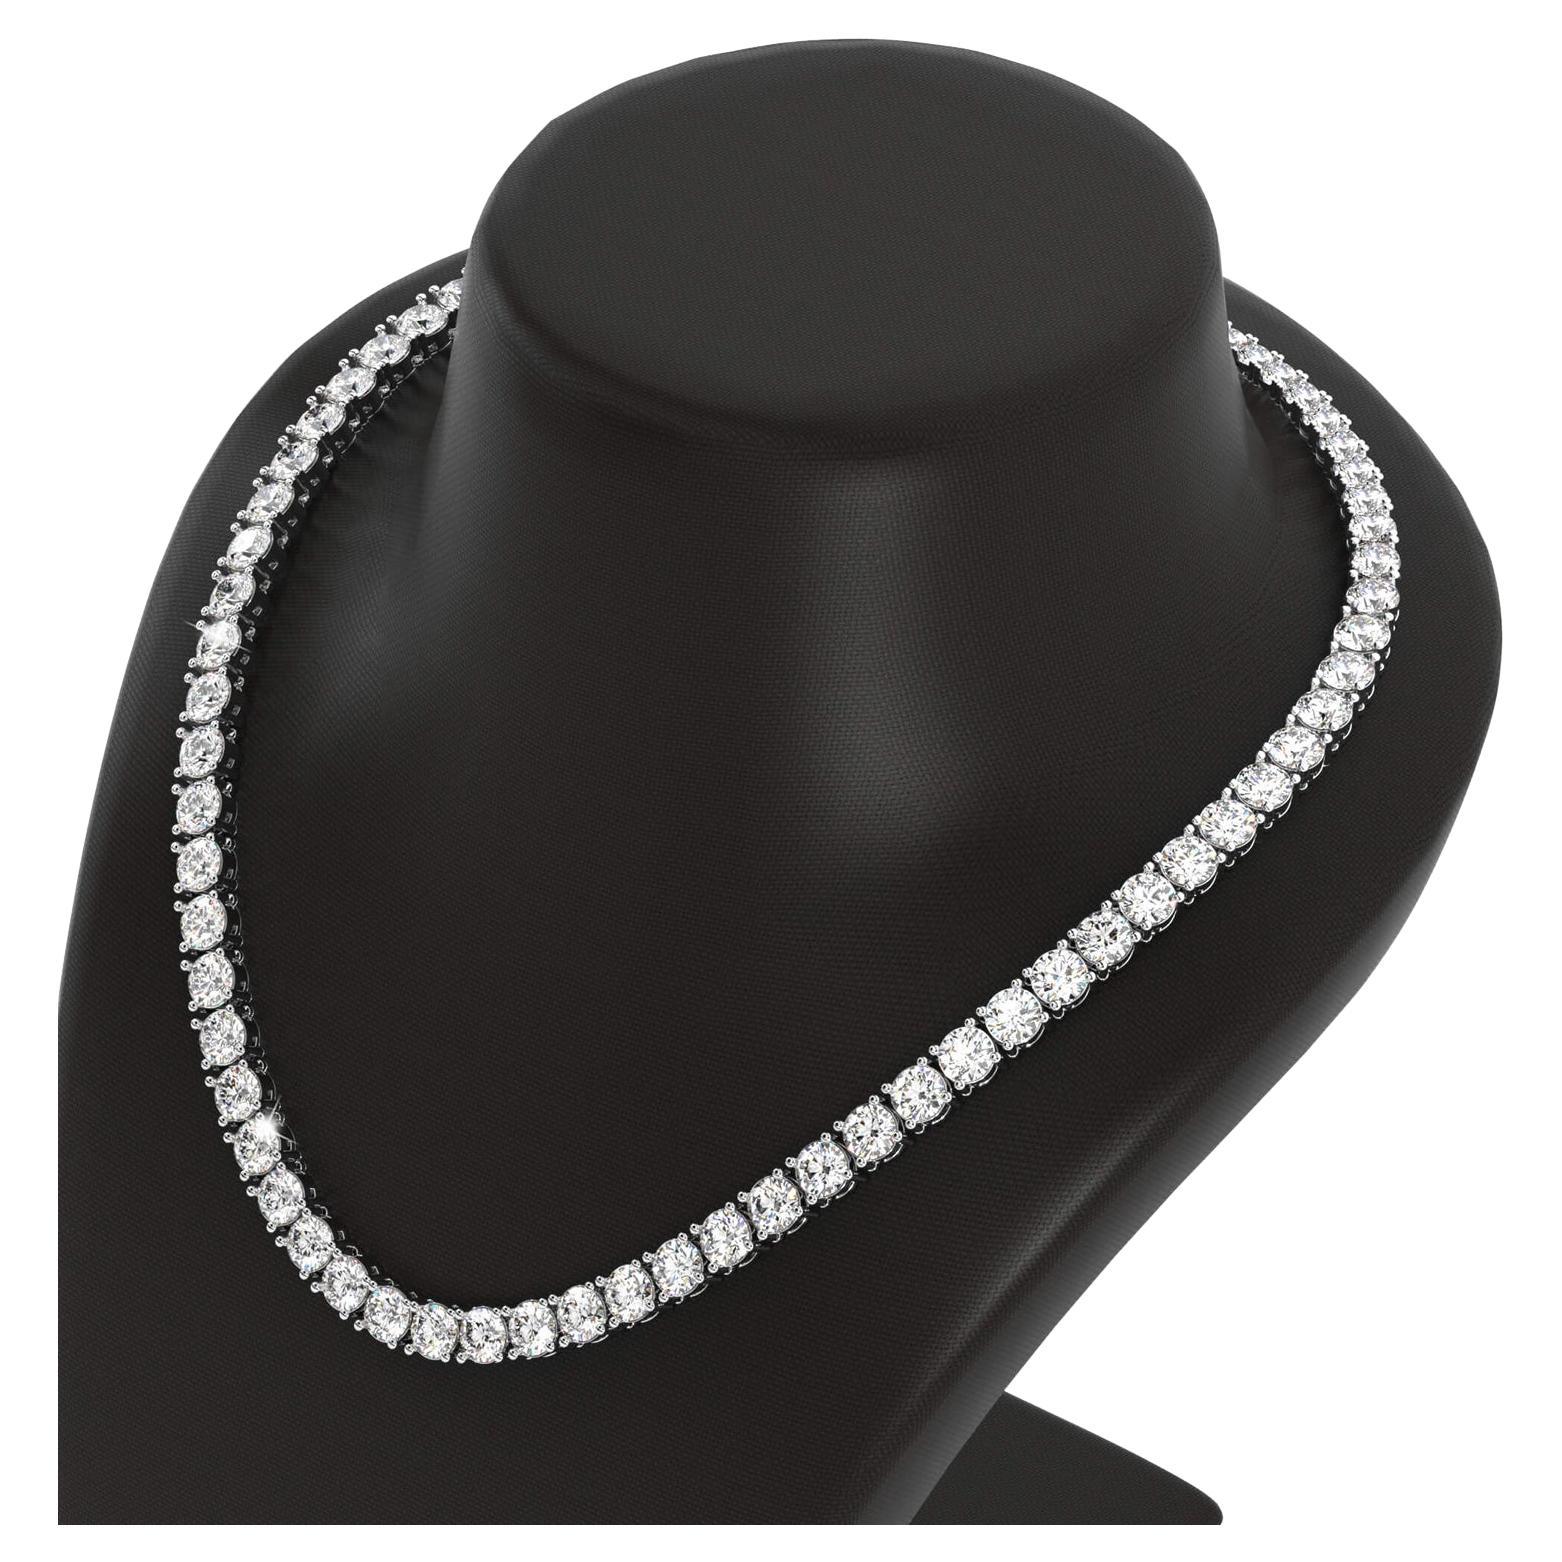 Indulge in the timeless elegance of our exquisite 24-inch Tennis necklace crafted in lustrous 18K white gold. Adorned with an array of meticulously set round diamonds, totaling an impressive 49.09 carats, each stone held securely in a delicate